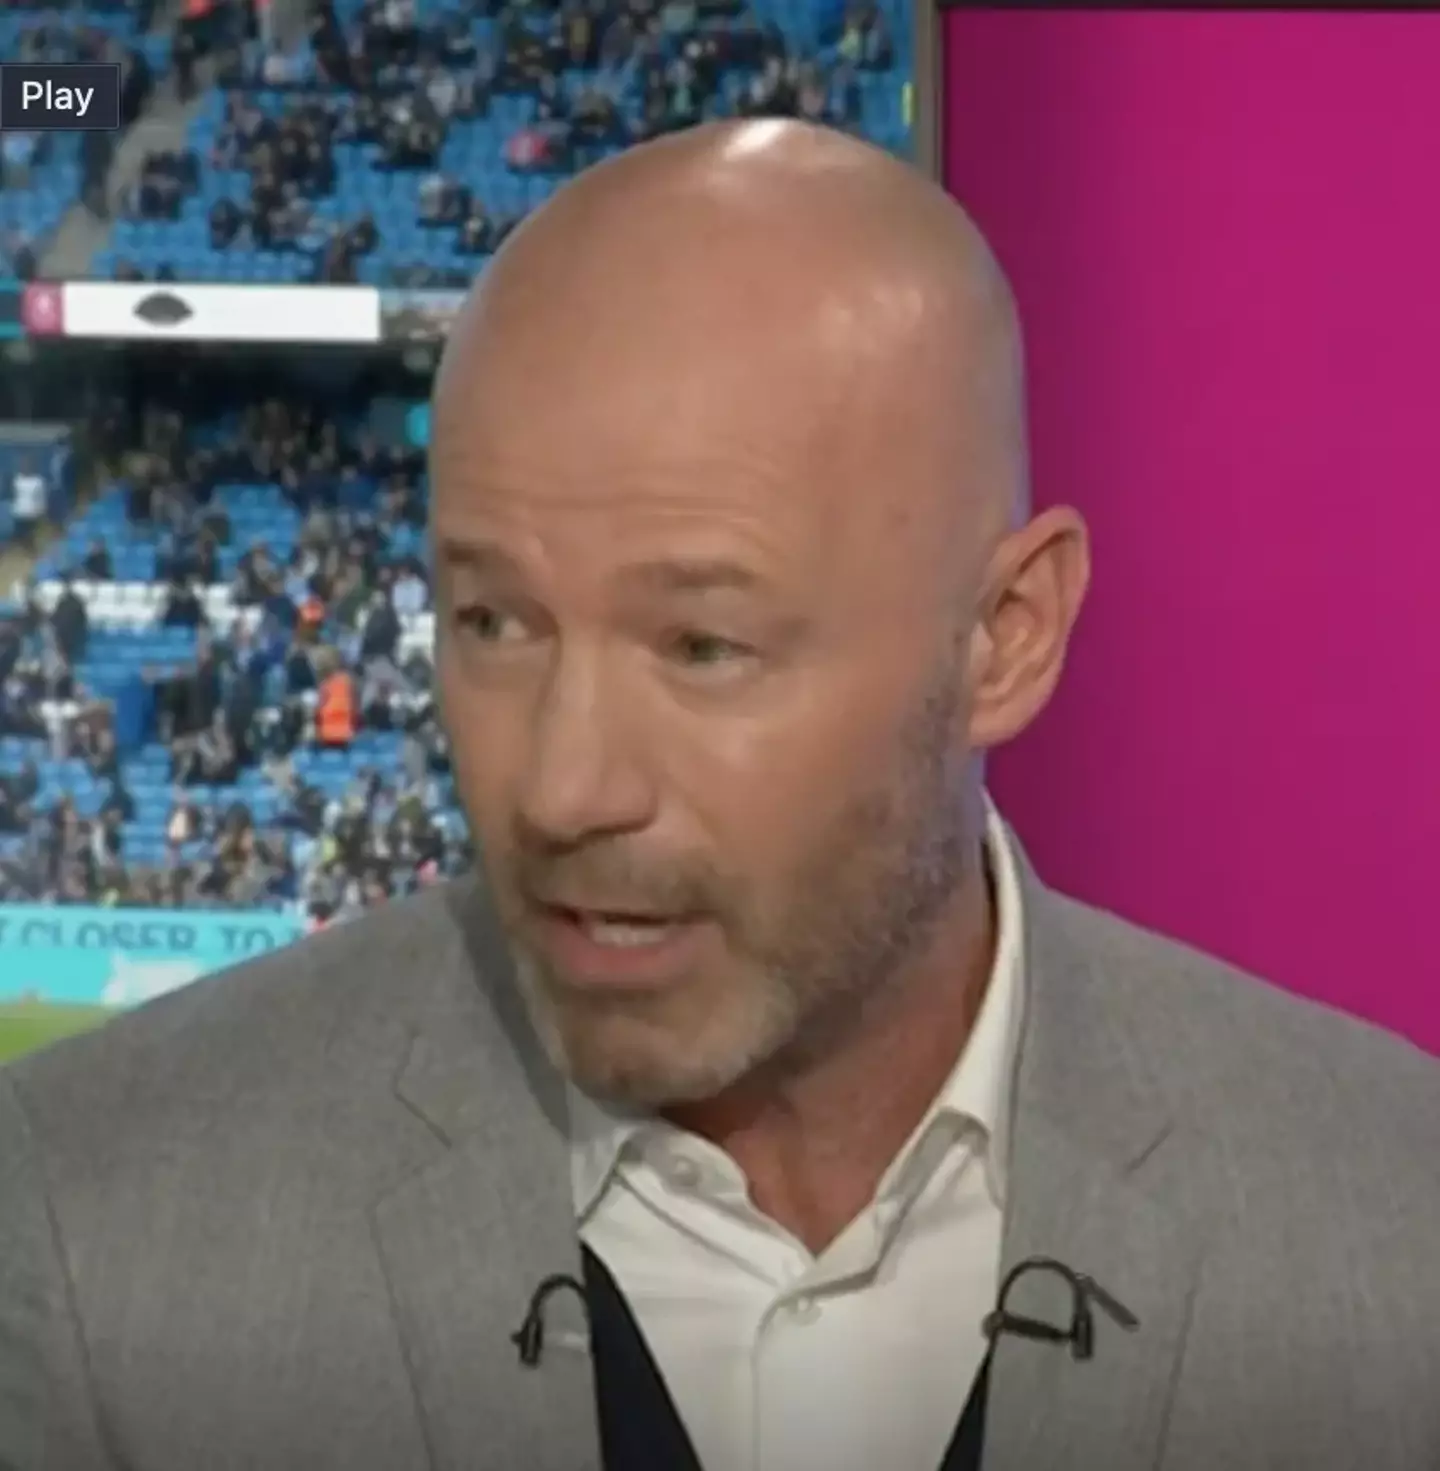 Shearer spoke up at the start of today's broadcast.